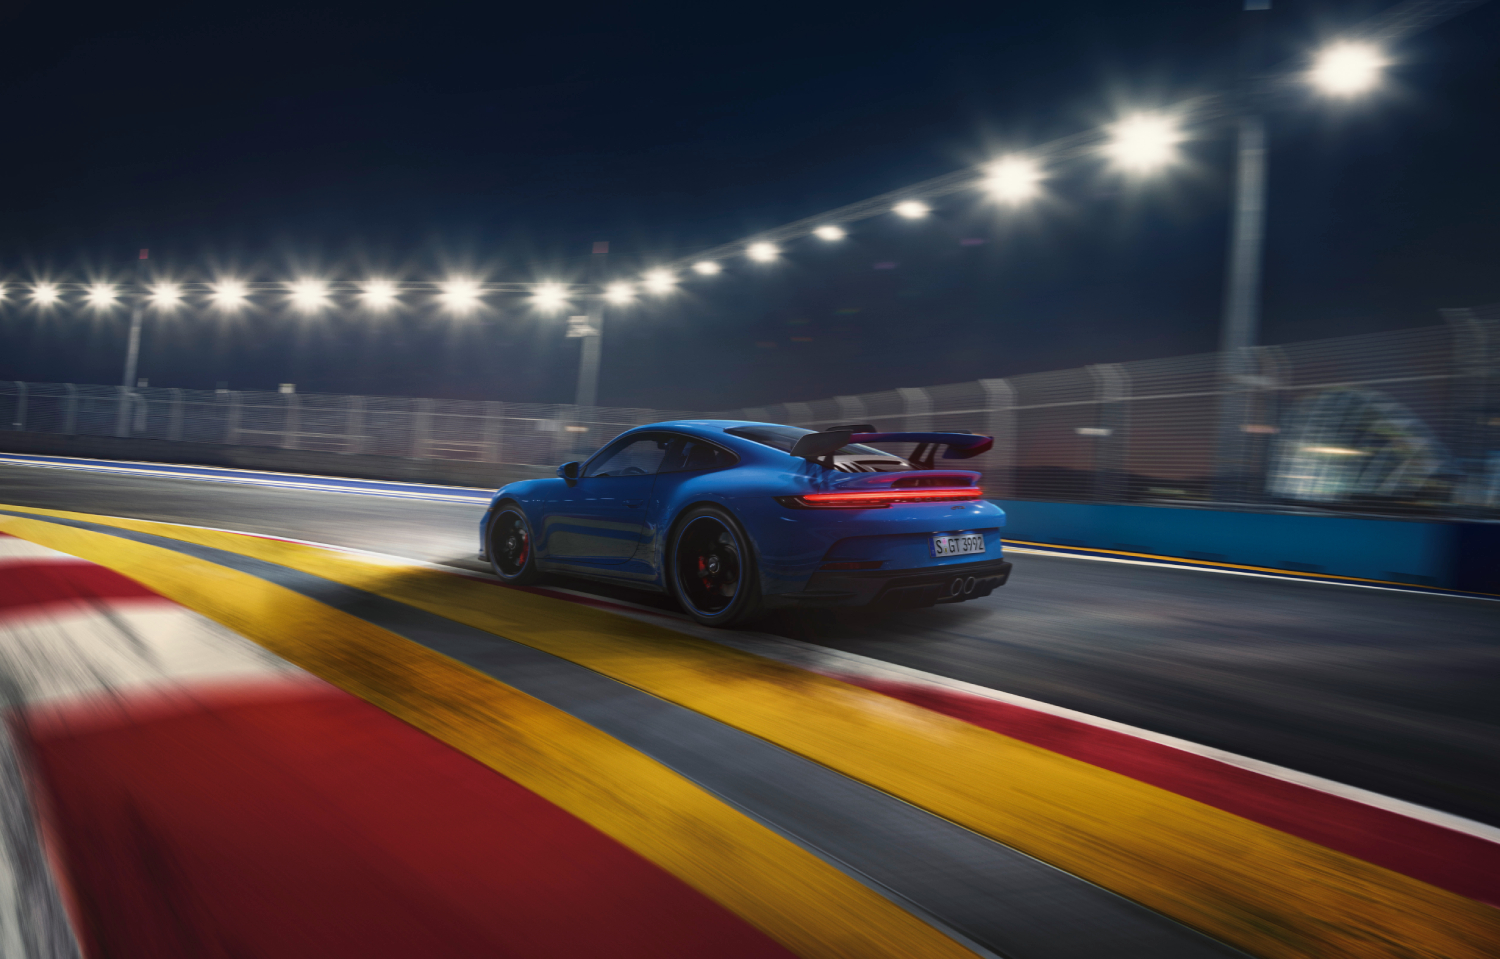 The 2022 Porsche 911 GT3 is one of MotorTrend's five quickest luxury cars of 2021 